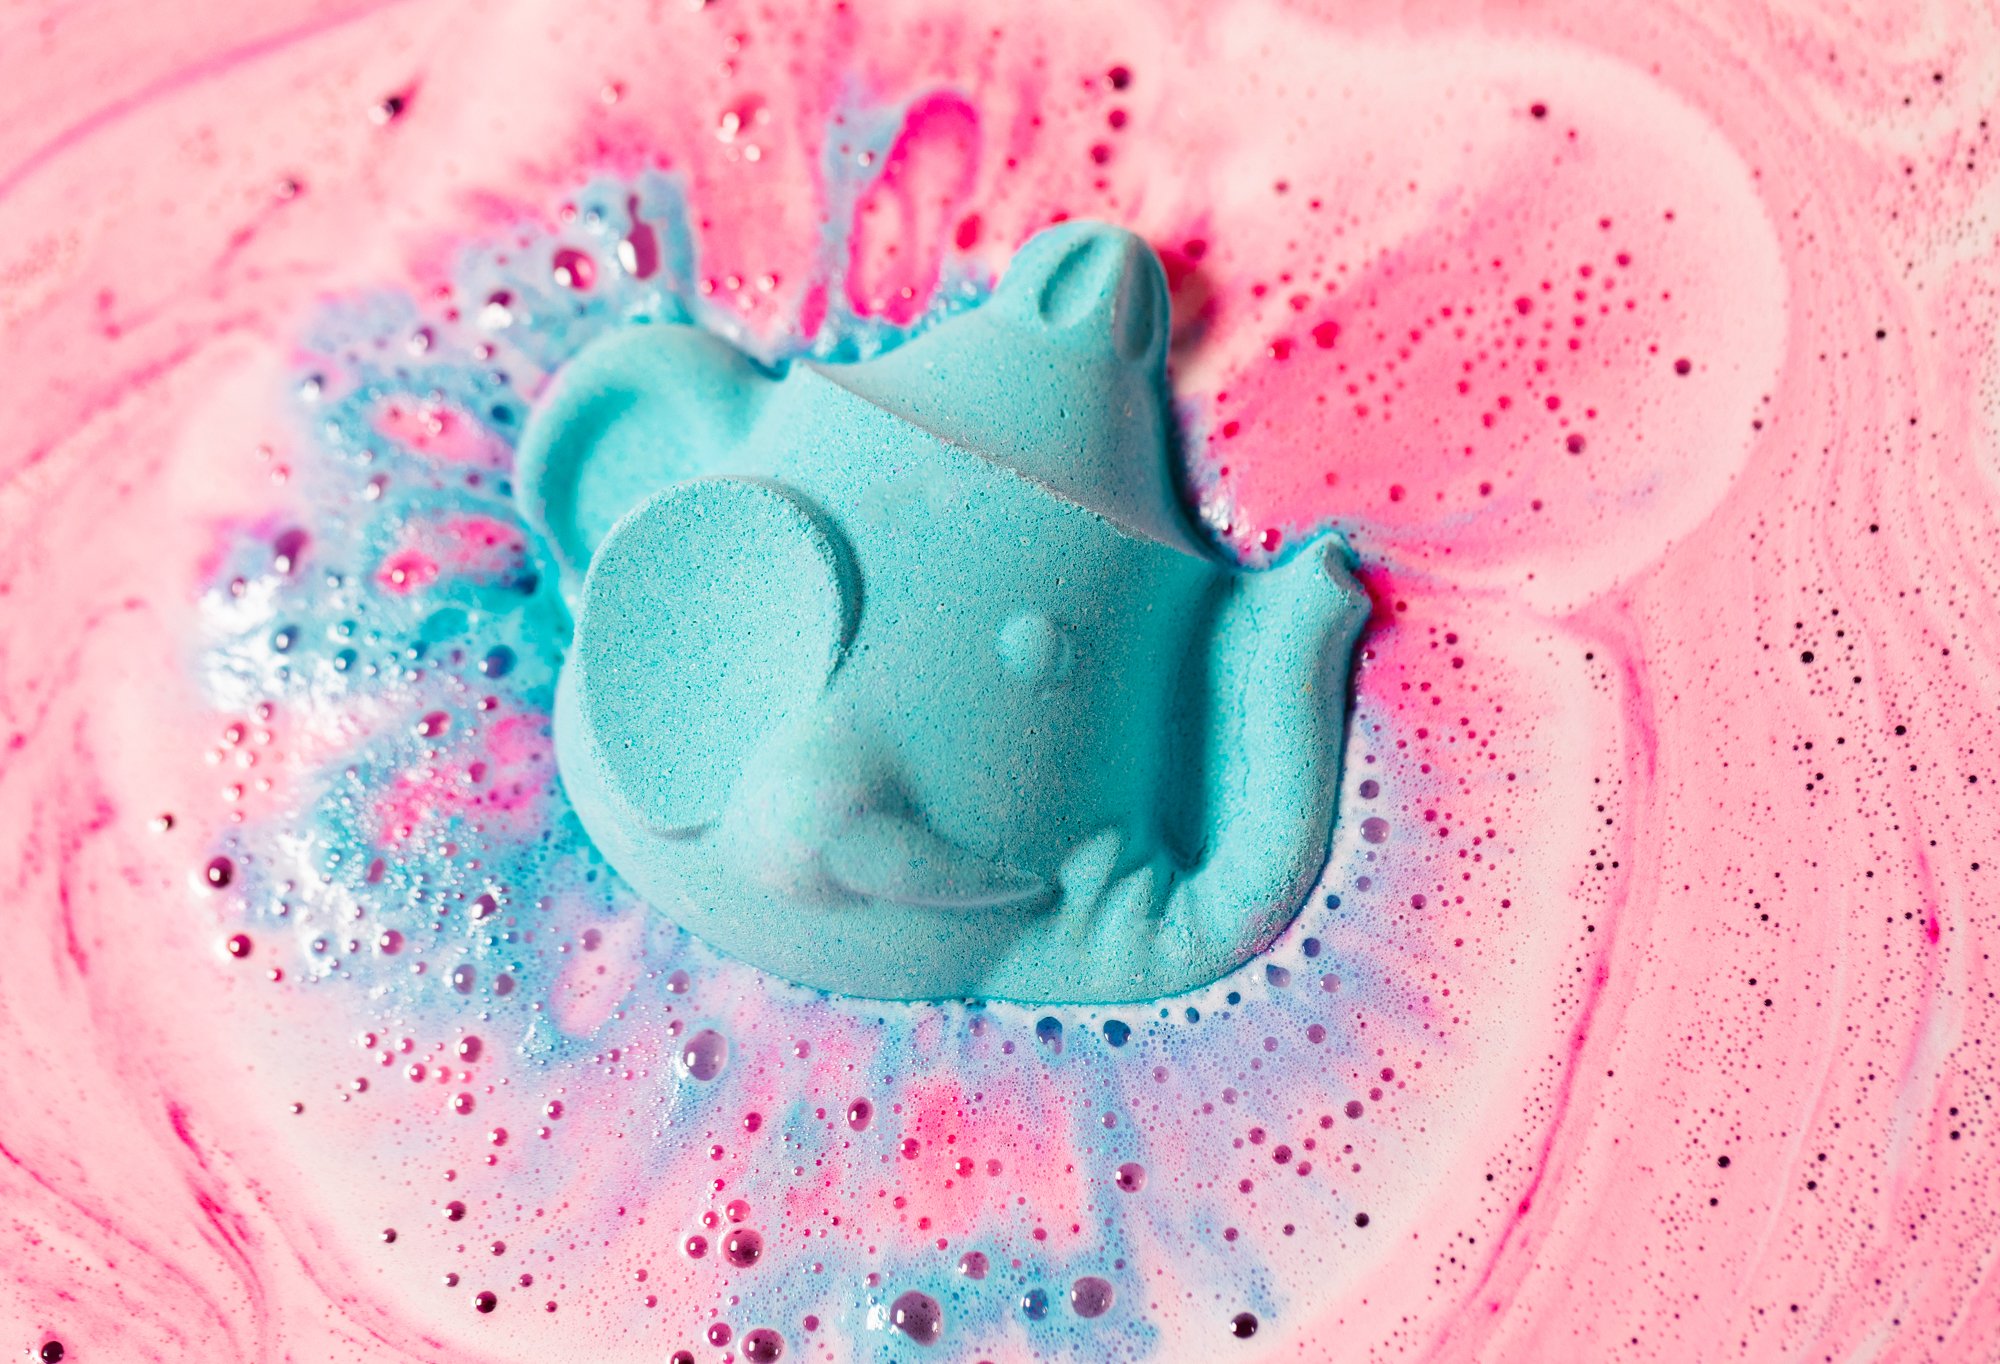 The teapot shaped bath bomb floats in gentle pink foam, its blue half facing up and fizzing out into the water.